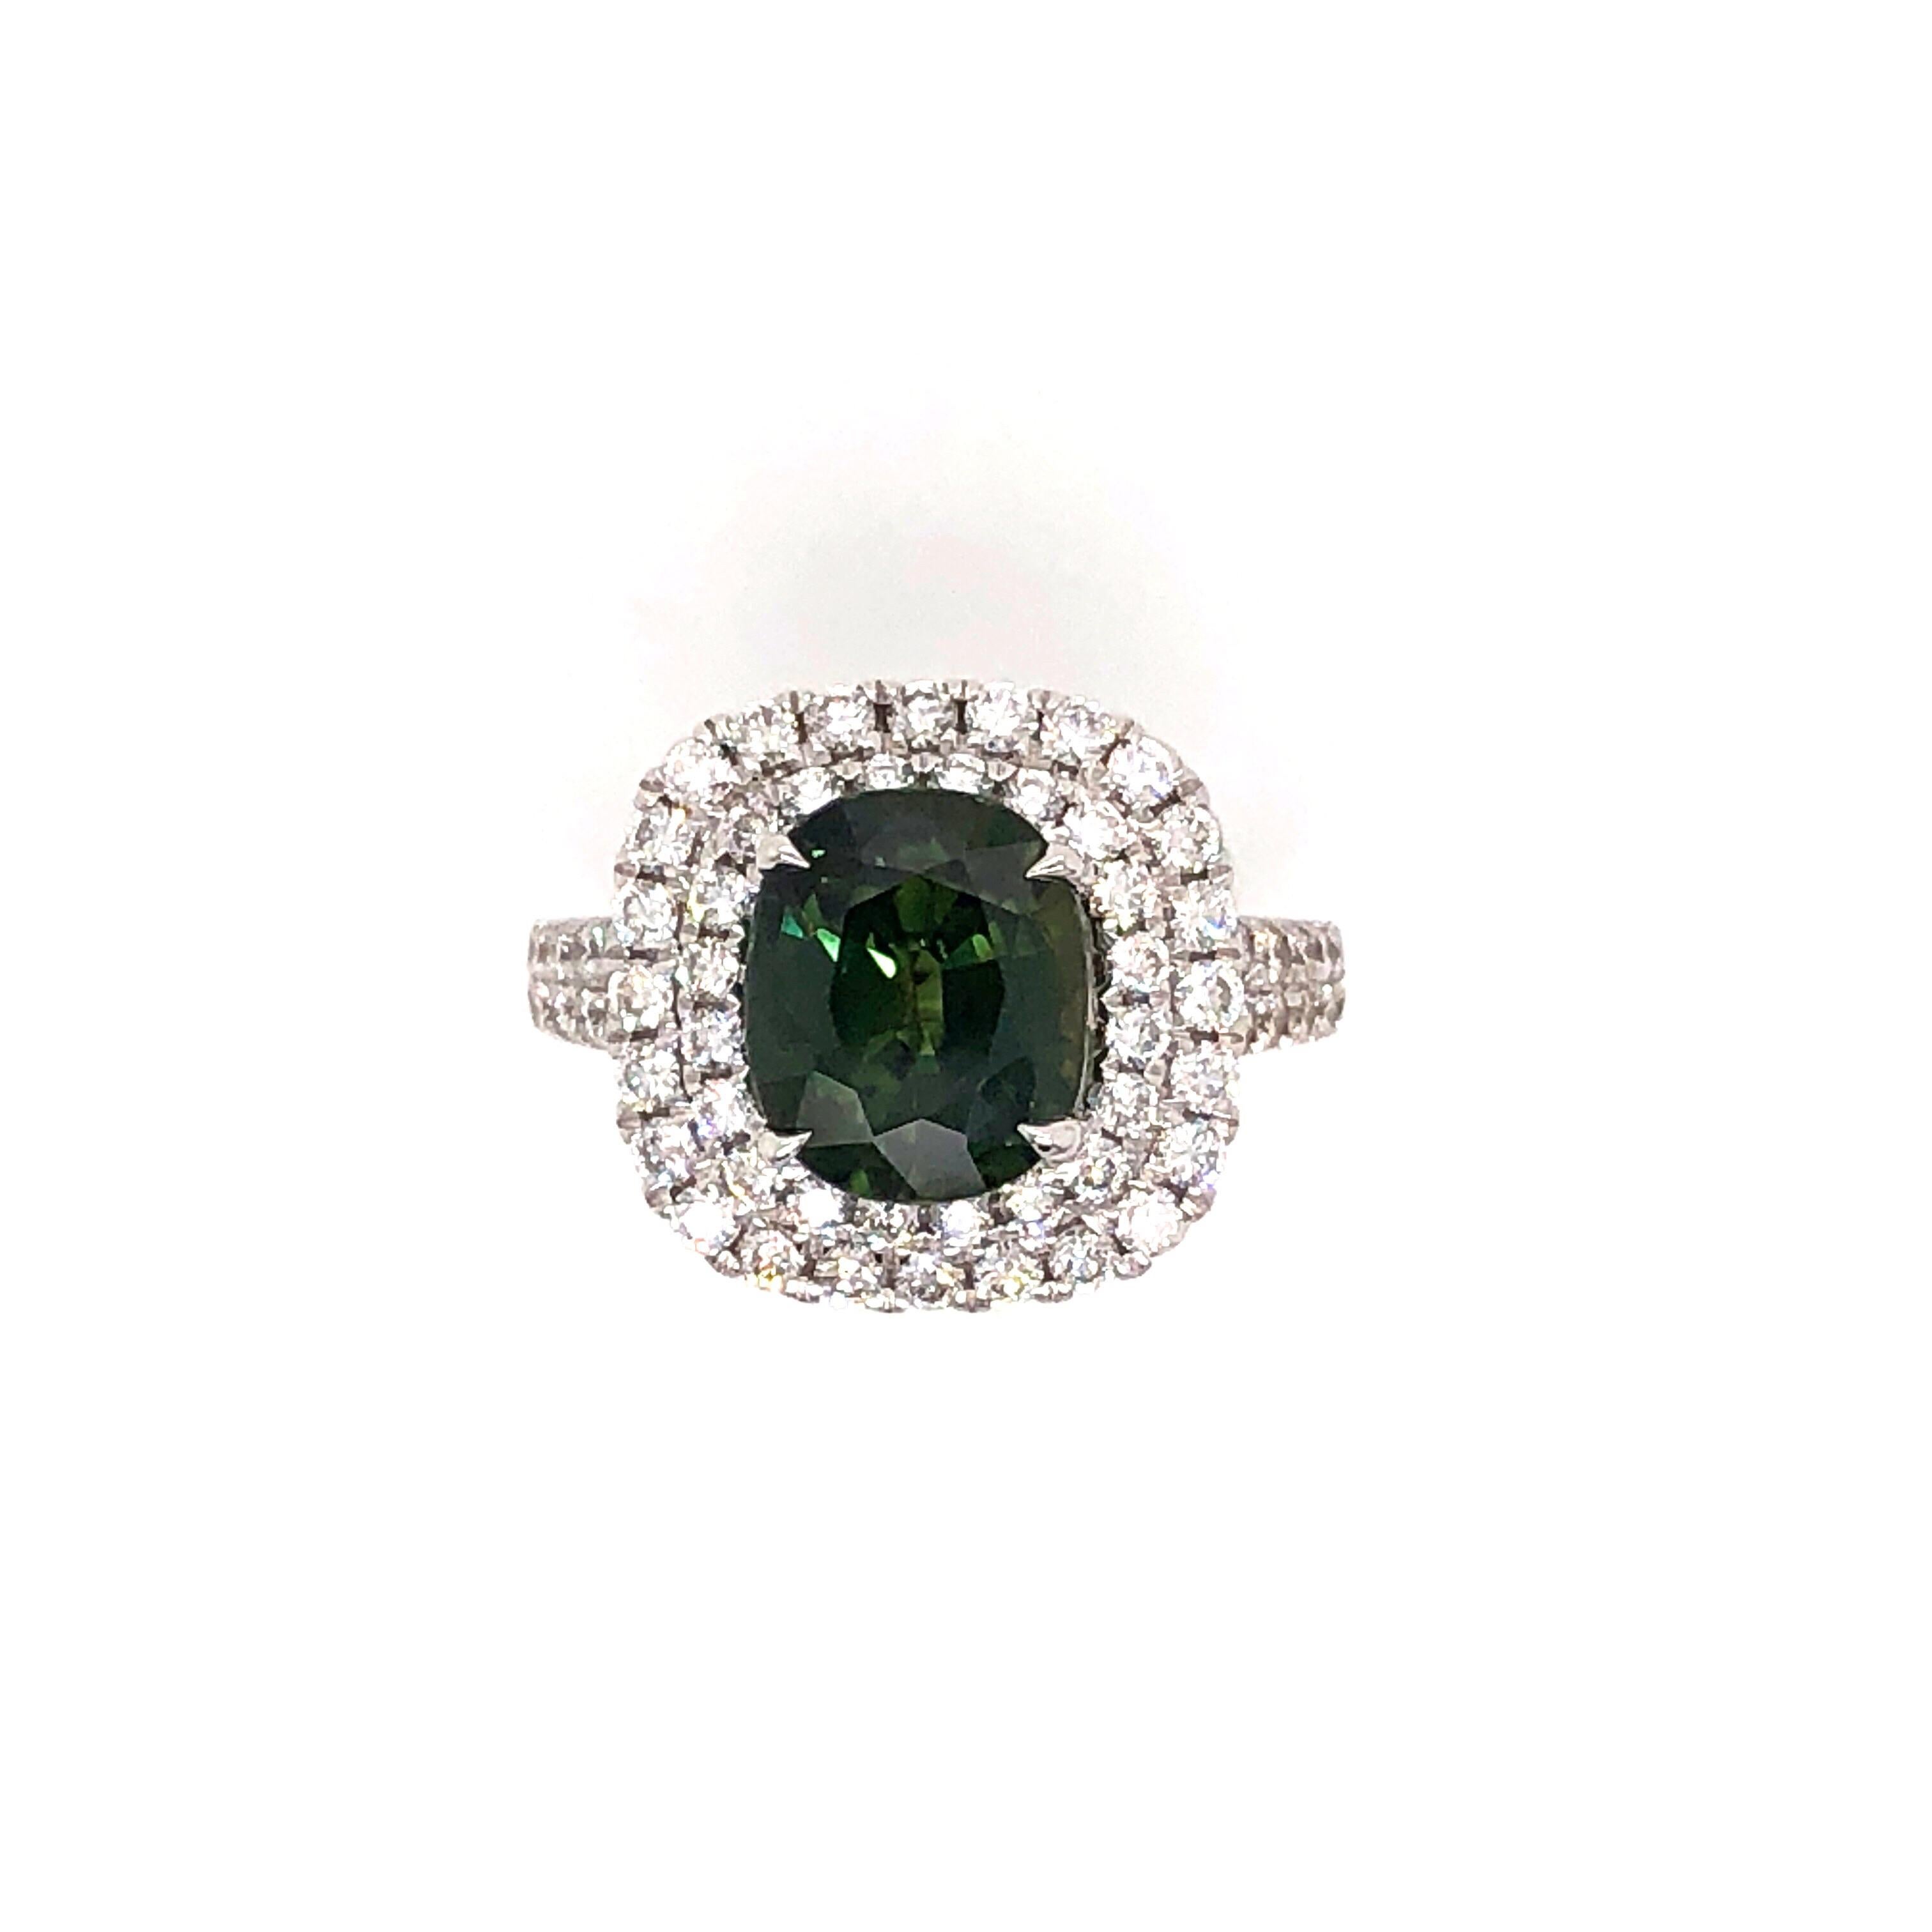 3.12 Carat Green Cushion Cut Sapphire 'GIA Lab Report' in an 18K Diamond Ring For Sale 2